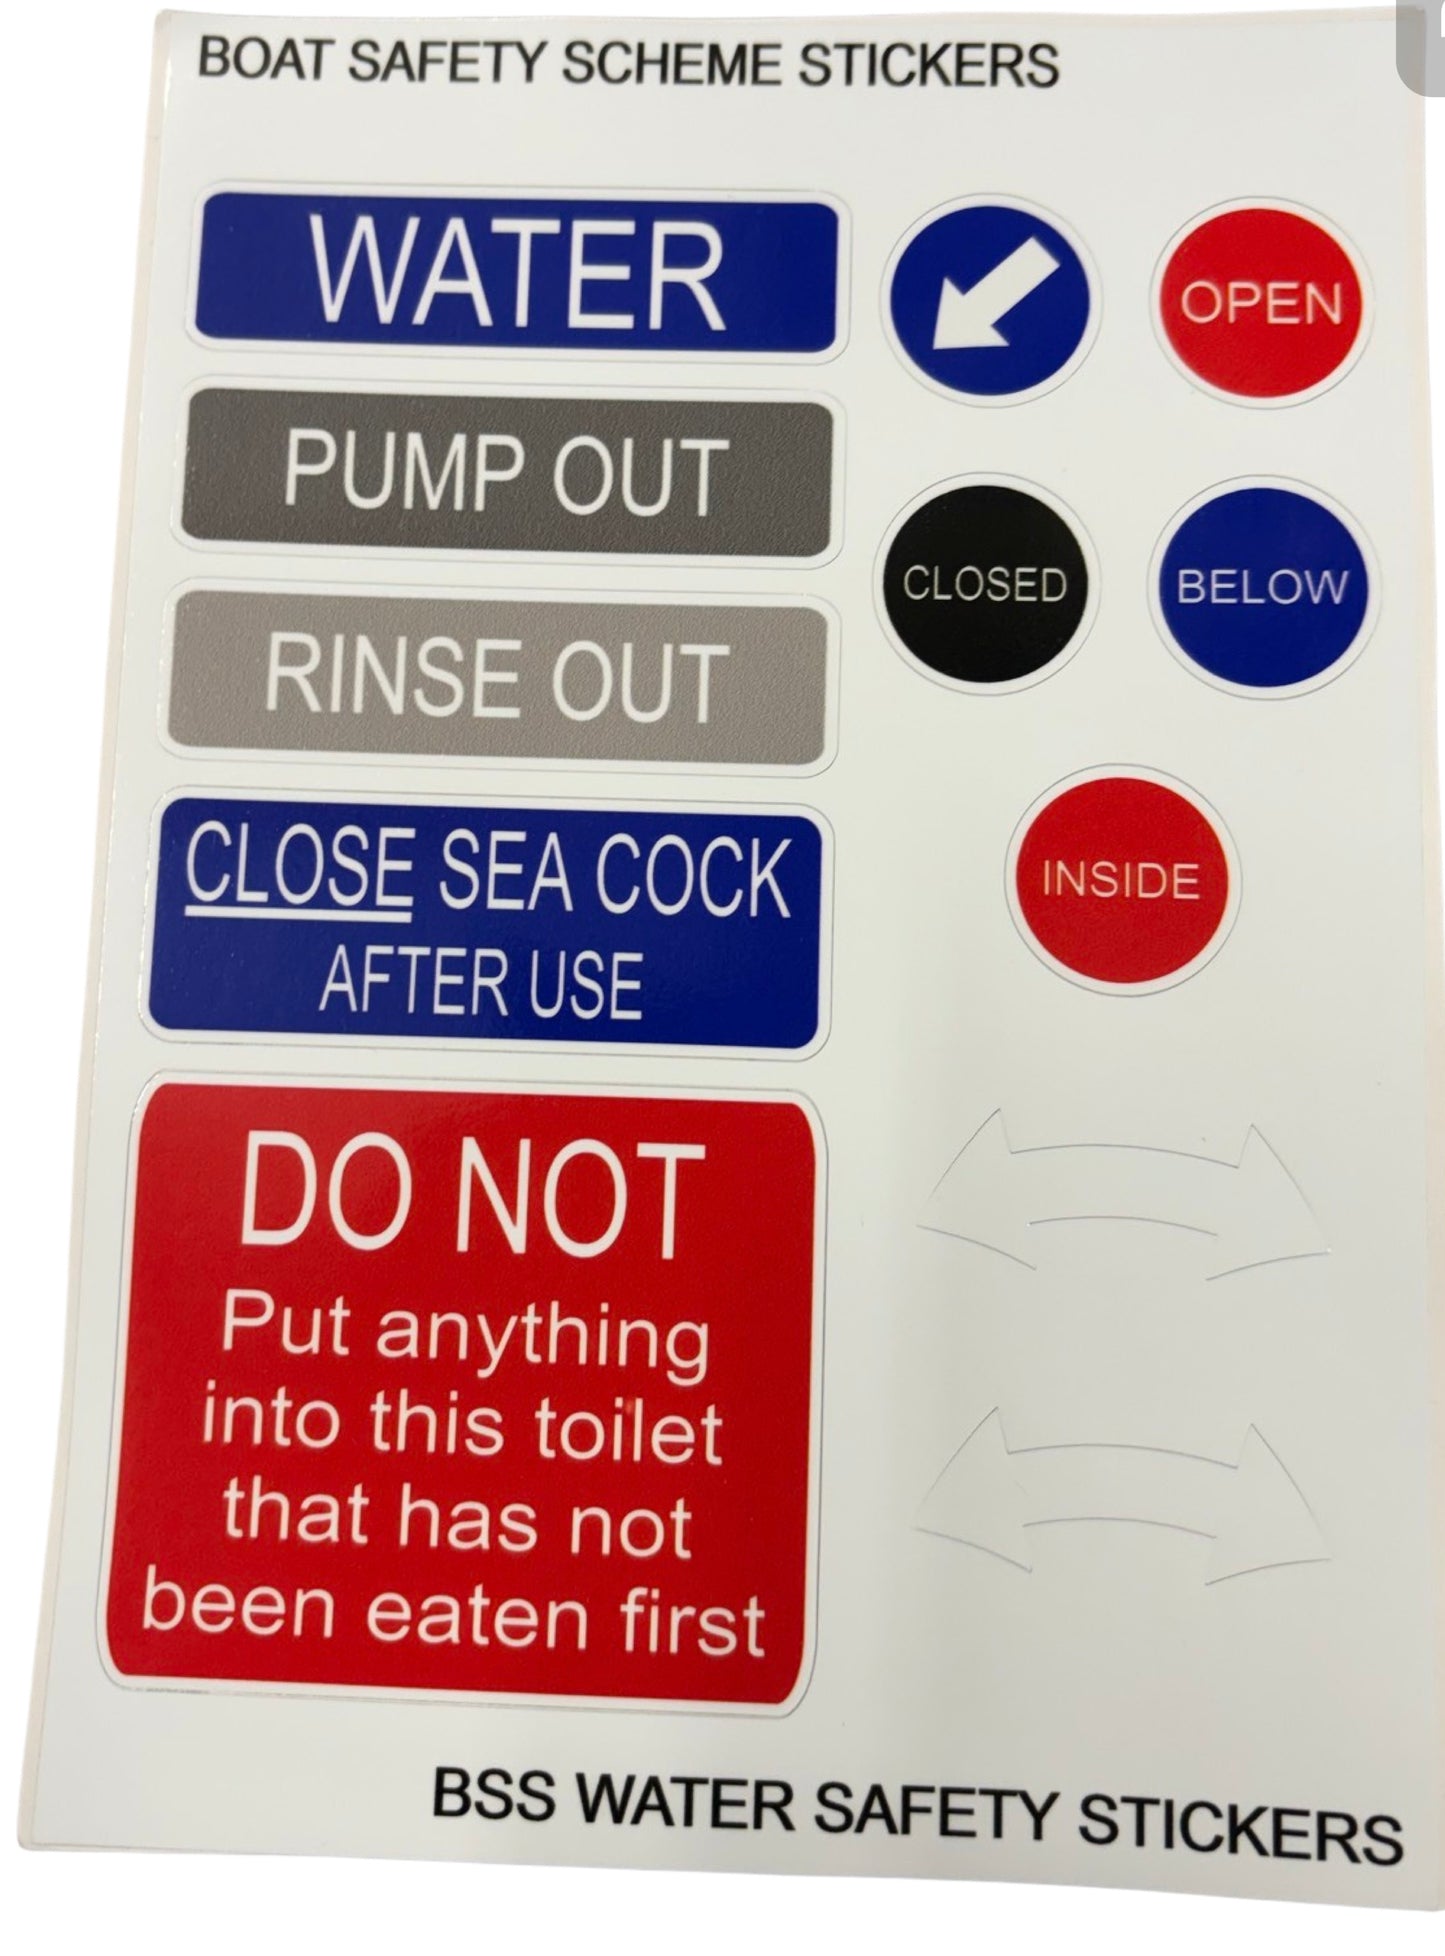 BSS Water - Boat Safety Scheme safety stickers (A5 Size)